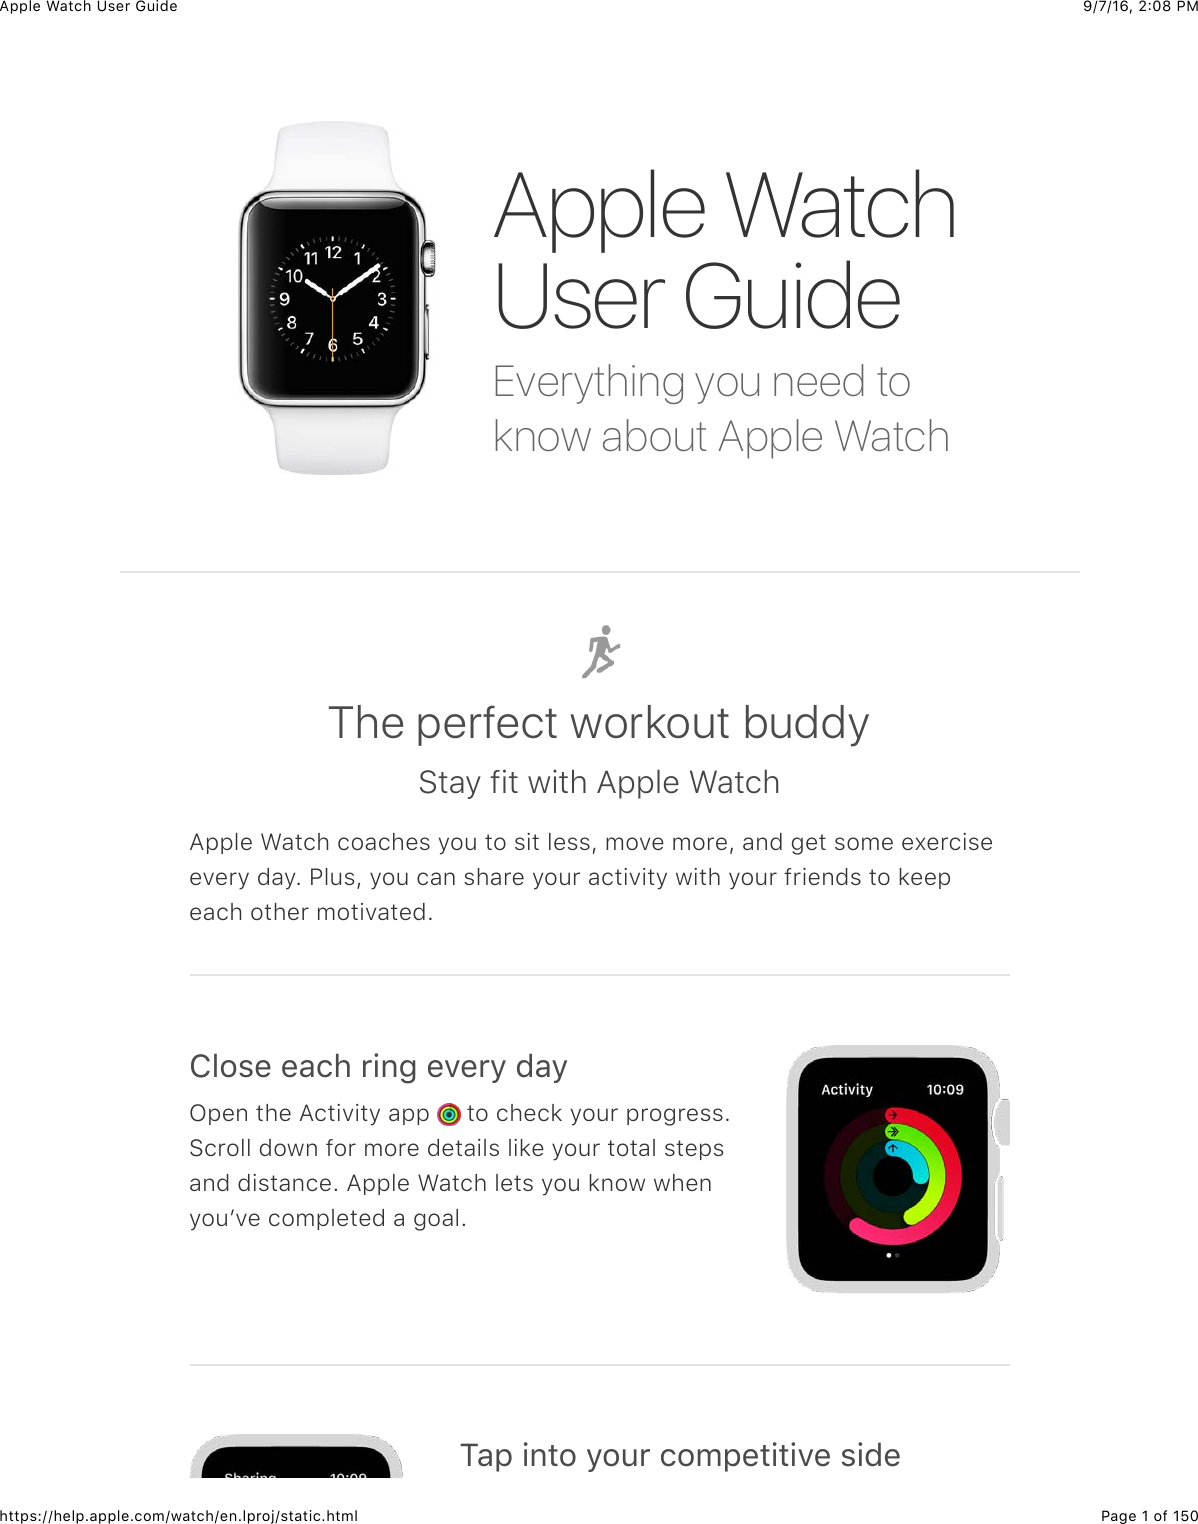 9/7/16, 2)08 PMApple Watch User GuidePage 1 of 150https://help.apple.com/watch/en.lproj/static.htmlEverything you need toknow about Apple WatchApple WatchUser GuideThe perfect workout buddyStay fit with Apple WatchApple Watch coaches you to sit less, move more, and get some exerciseevery day. Plus, you can share your activity with your friends to keepeach other motivated.!&quot;#$%&amp;%&apos;()&amp;*+,-&amp;%.%*/&amp;0&apos;/Open the Activity app   to check your progress.Scroll down for more details like your total stepsand distance. Apple Watch lets you know whenyouʼve completed a goal.1&apos;2&amp;+,3#&amp;/#4*&amp;(#52%3+3+.%&amp;$+0%